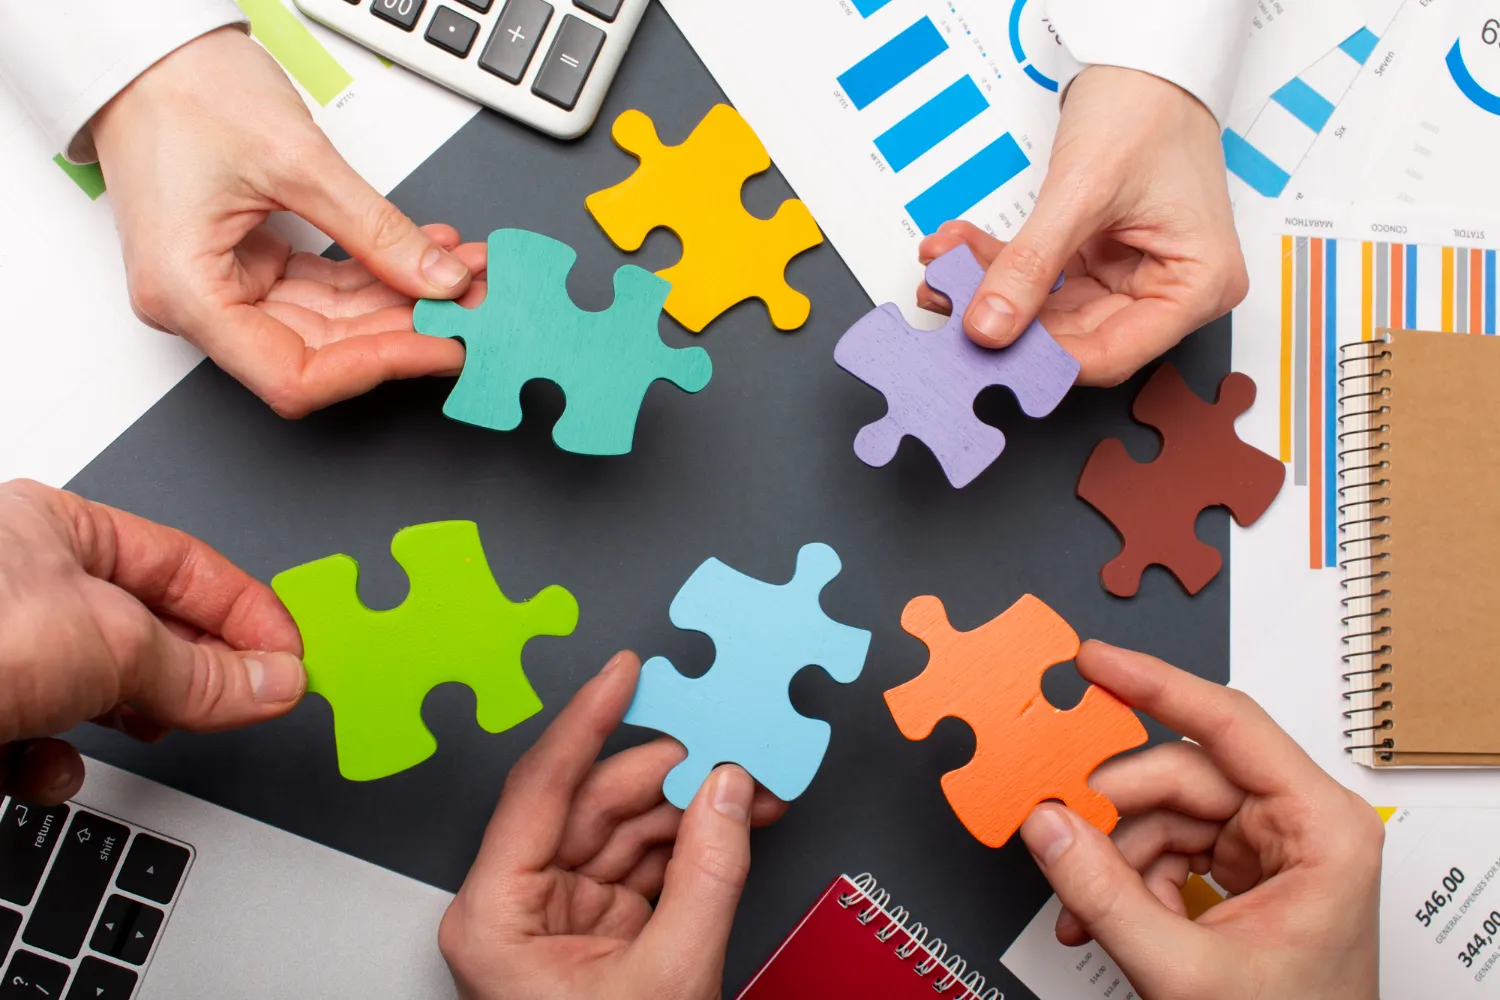 Hands of a diverse team fitting colorful puzzle pieces together, symbolizing JOH Partners' strategy for fostering a dynamic workplace culture.